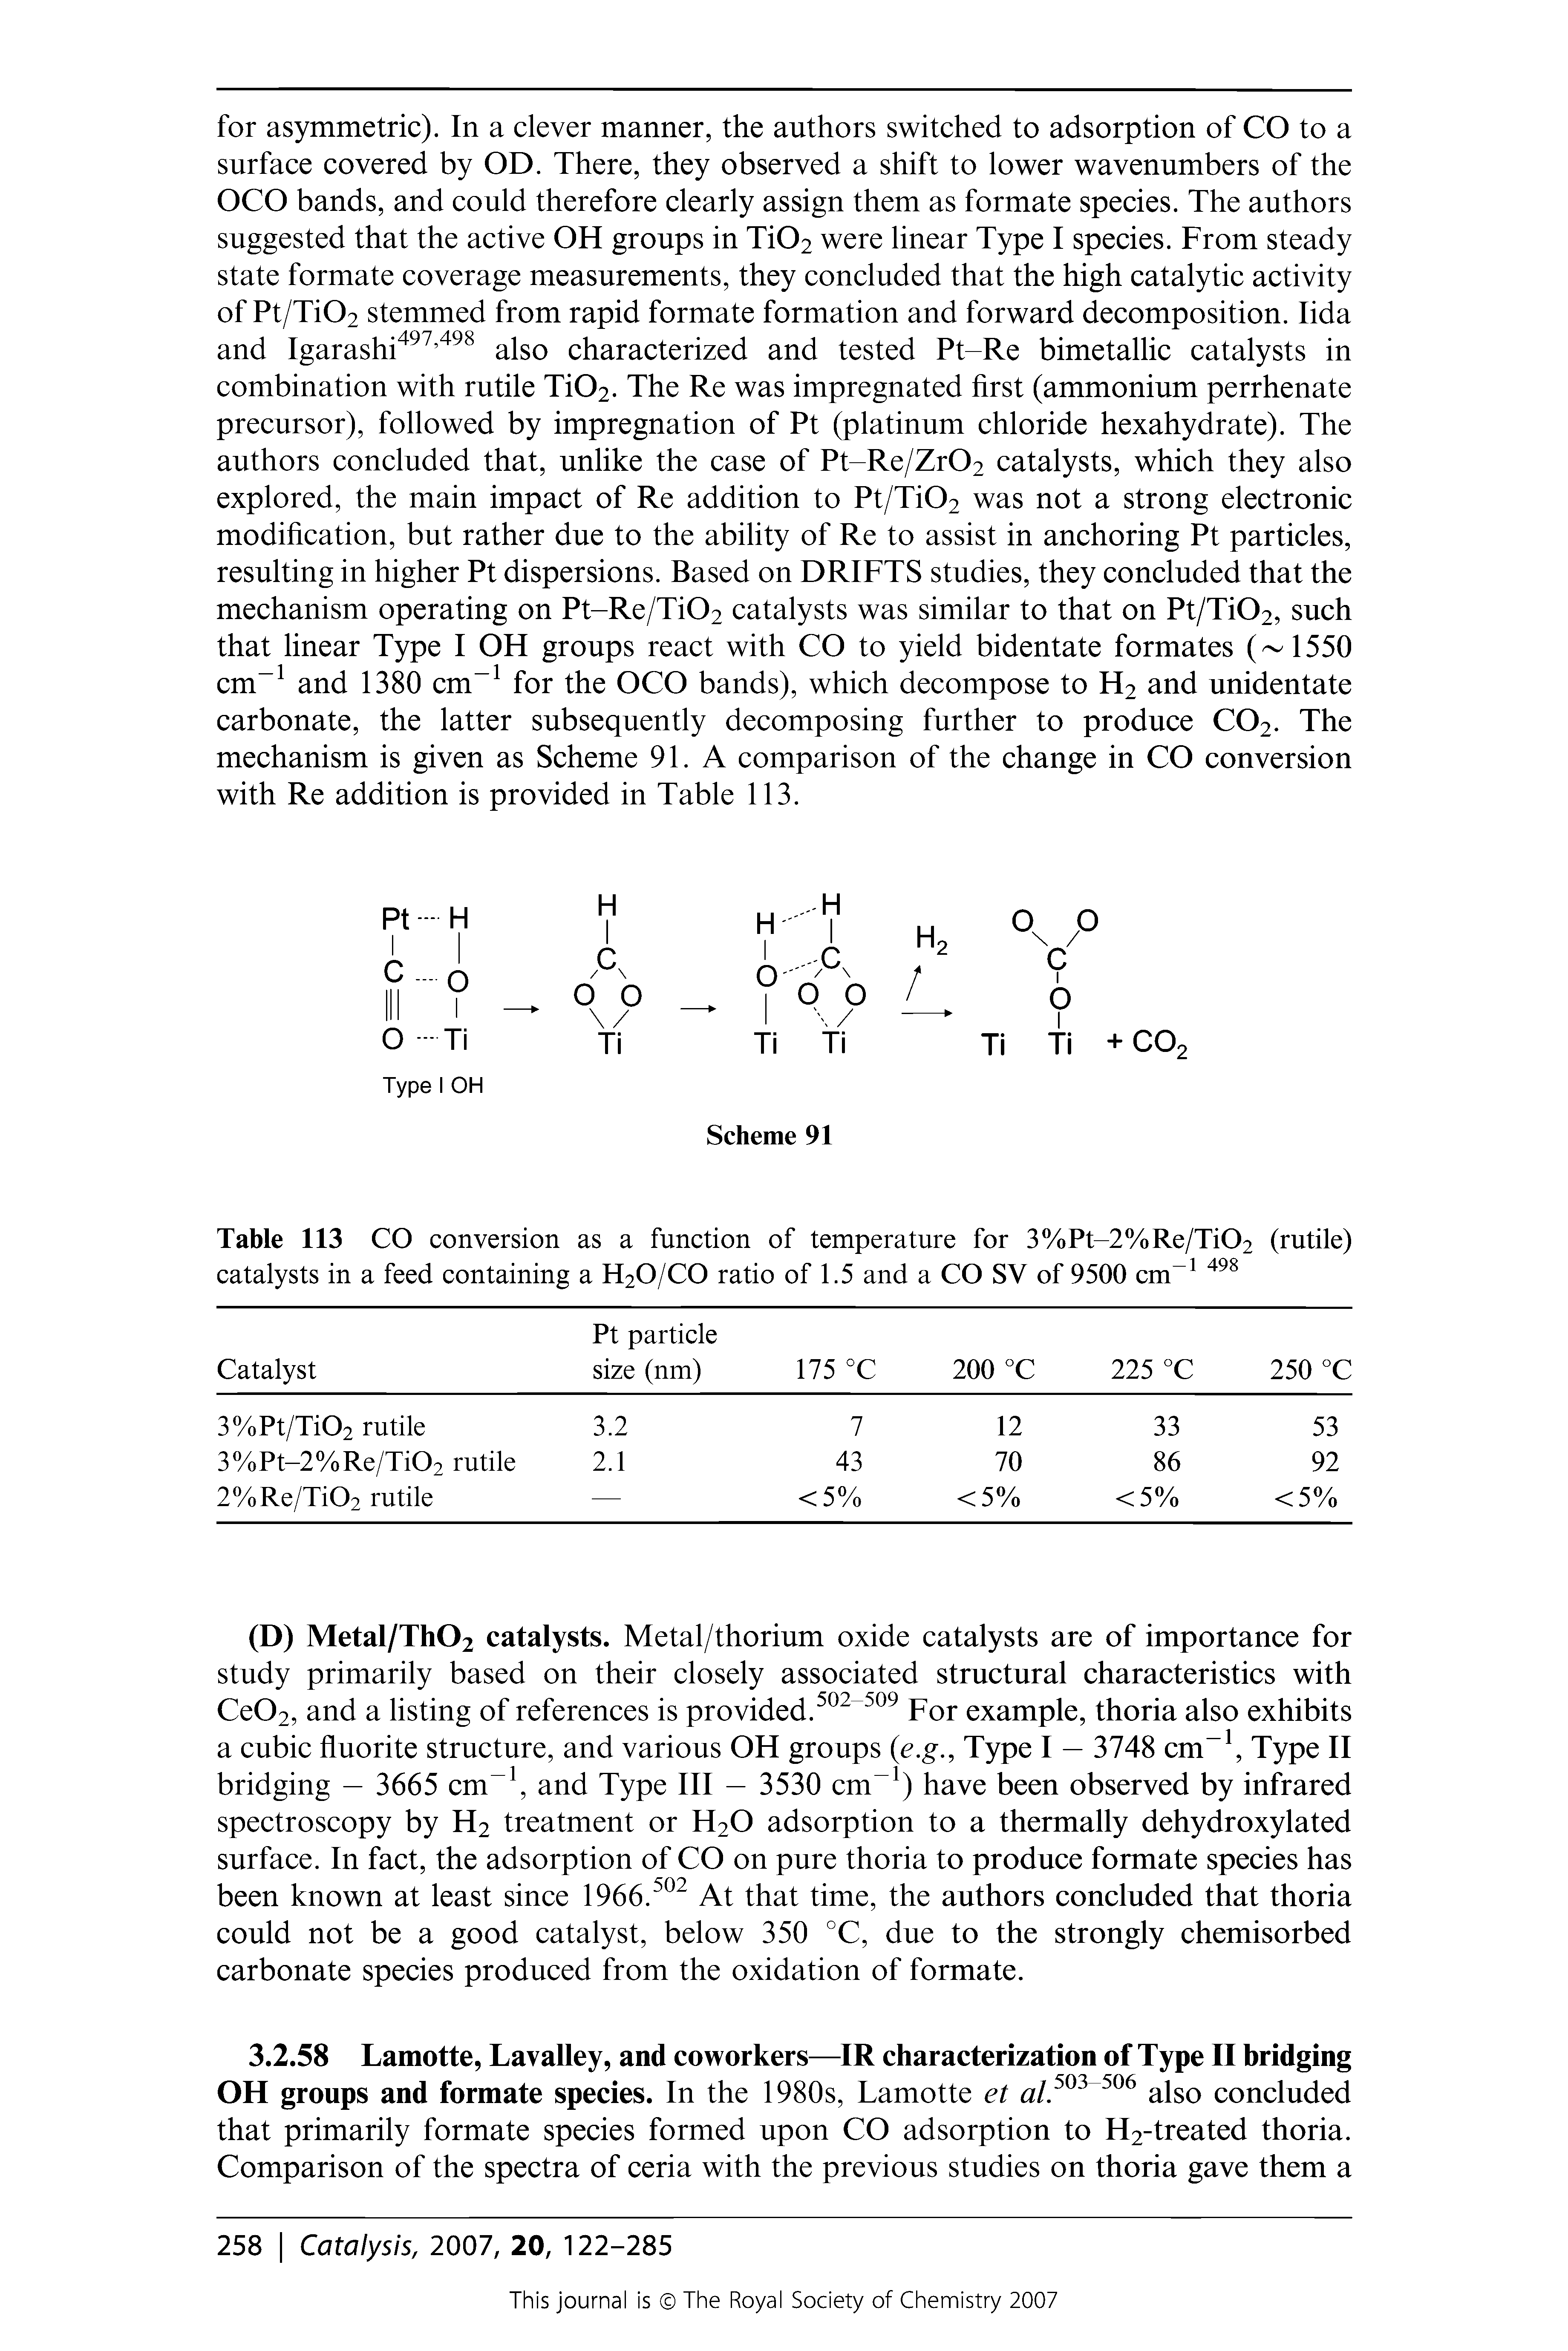 Table 113 CO conversion as a function of temperature for 3%Pt-2%Re/Ti02 (rutile) catalysts in a feed containing a H20/C0 ratio of 1.5 and a CO SY of 9500 cm-1 498...